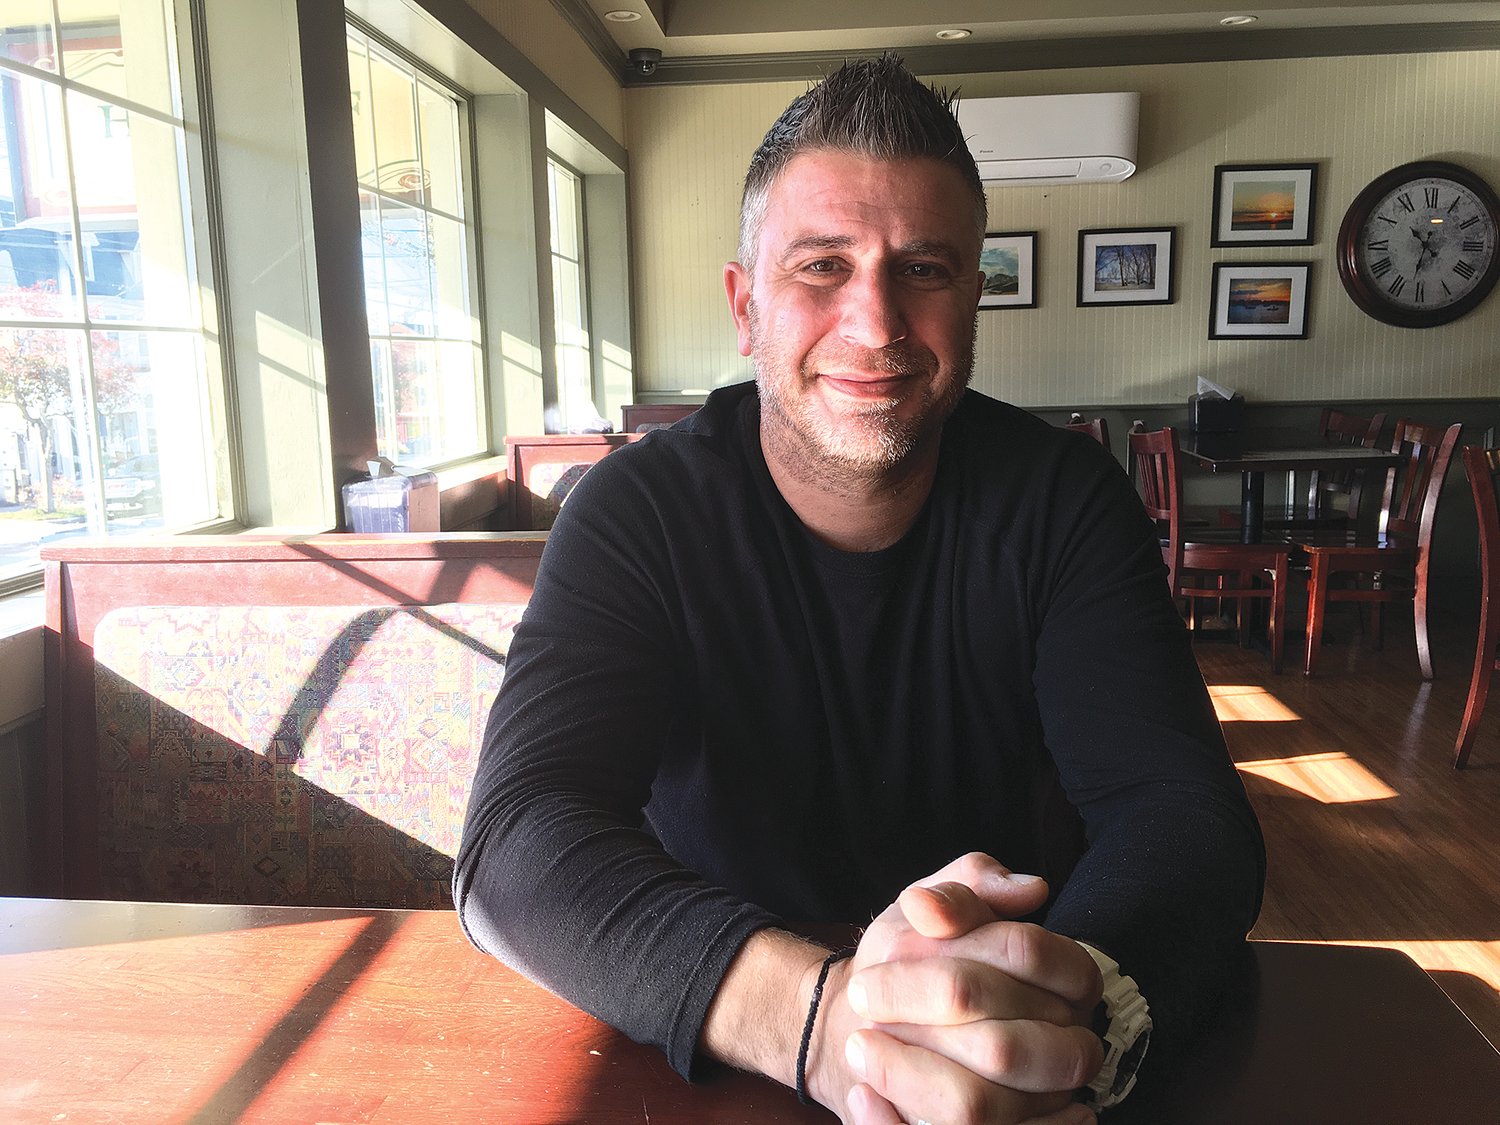 Greg Gatos said Bristol House of Pizza, which once employed more than 20 people outside of the kitchen, is down to only four. He’s become increasingly frustrated with everything, including young workers who aren’t interested in working.